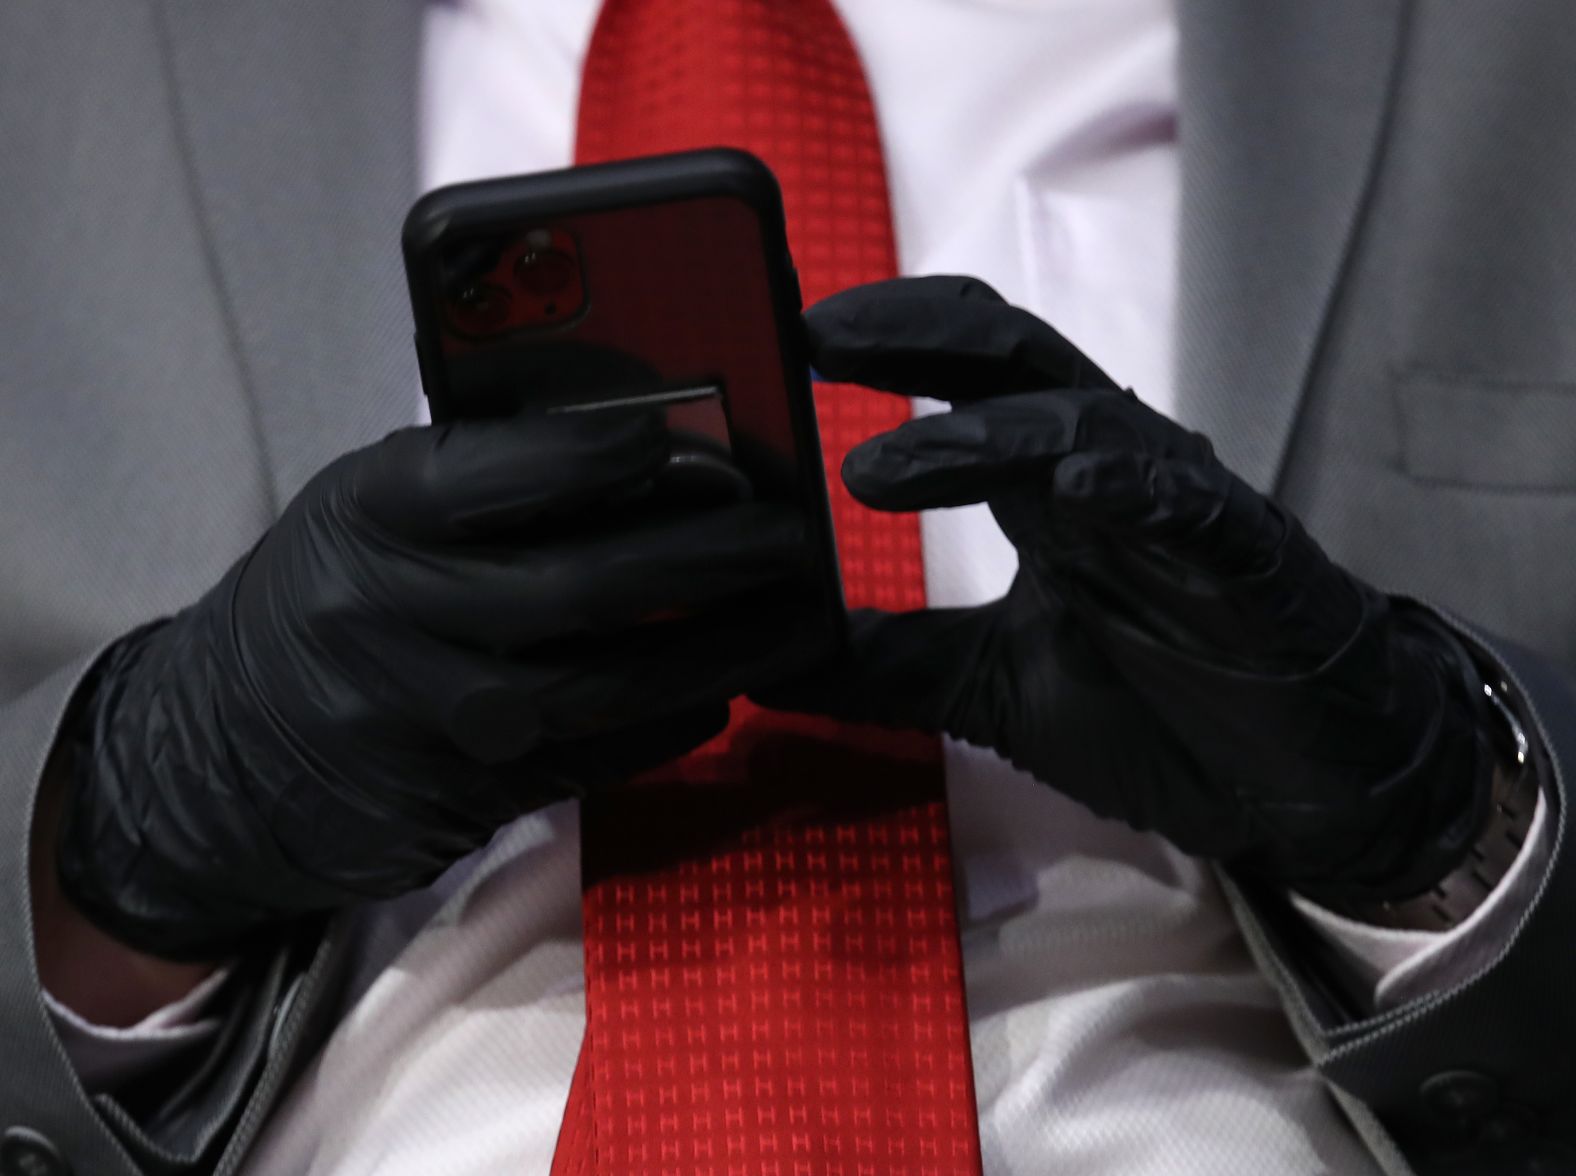 A Senate staffer wears protective gloves during the hearing.